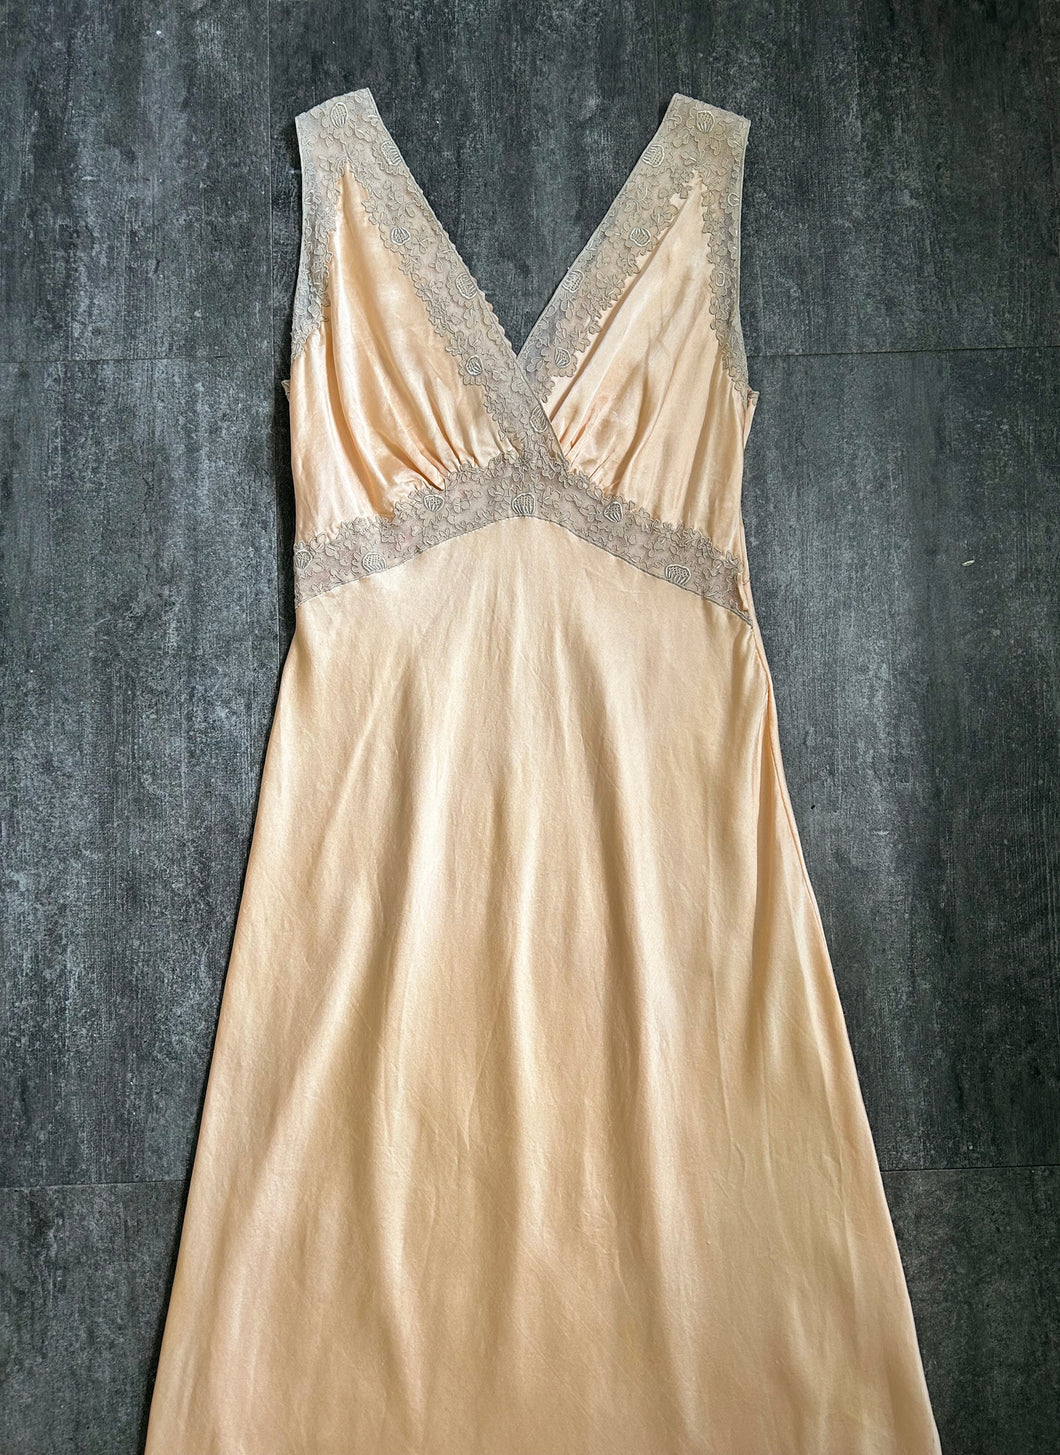 1930s 1940s slip dress . vintage satin and lace nightgown . size small